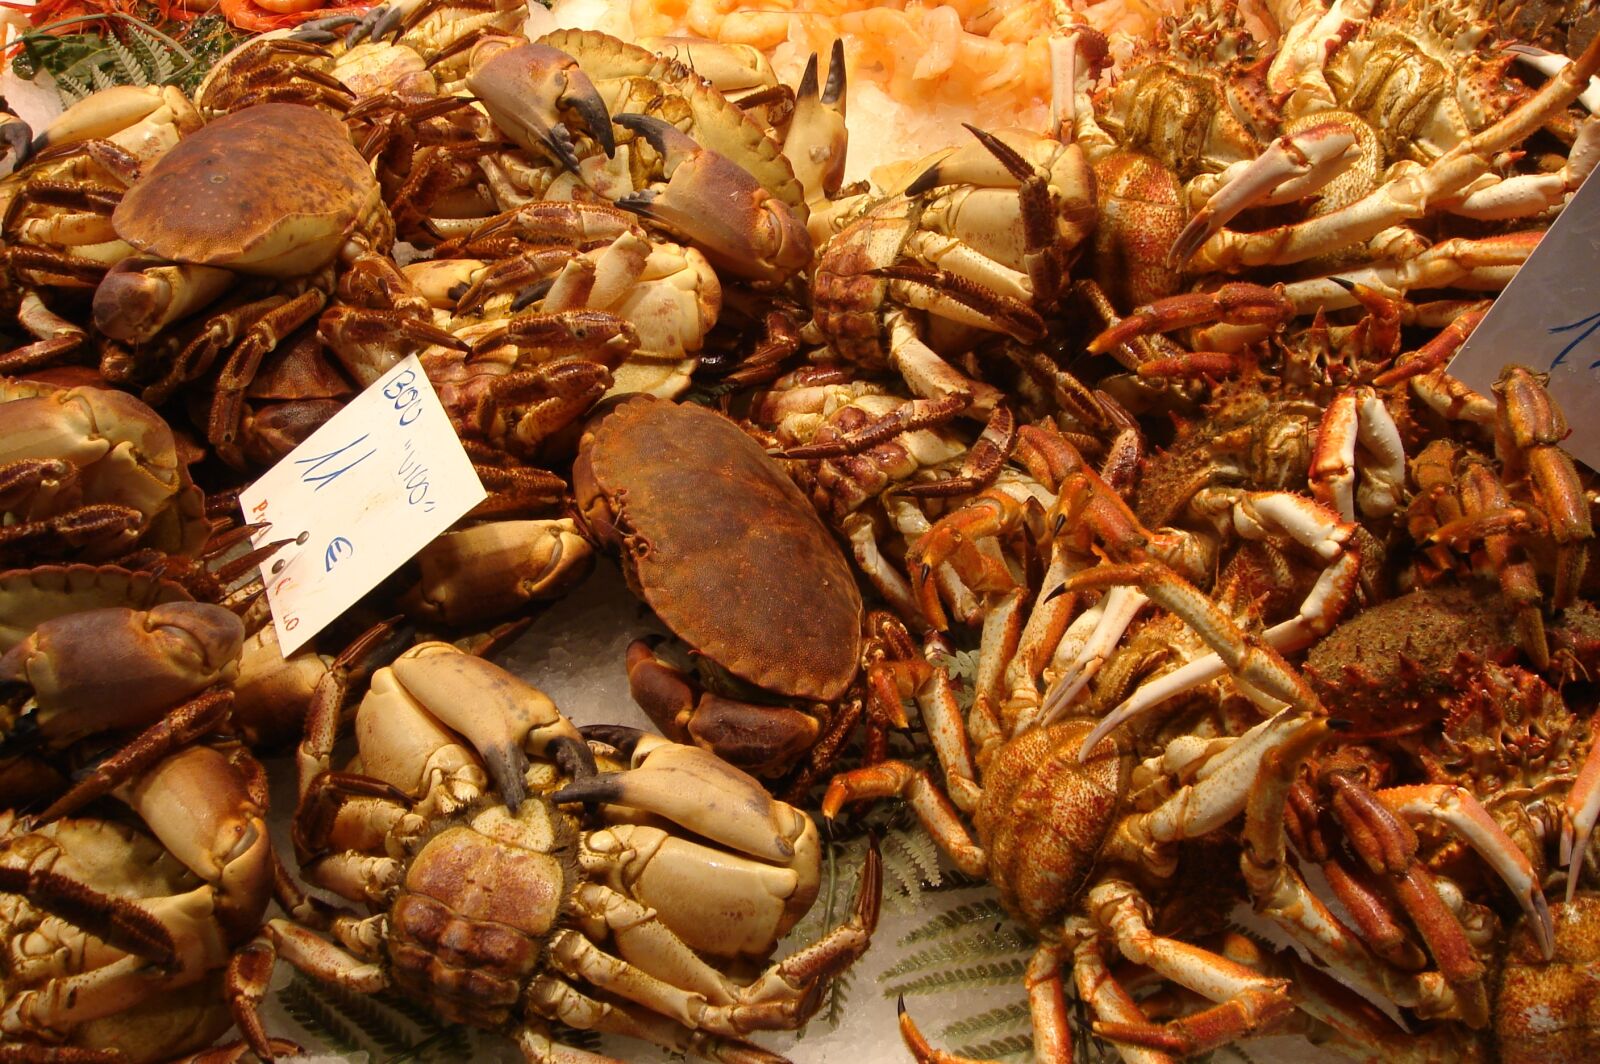 Sony DSC-T9 sample photo. Crabs, seafood, food photography